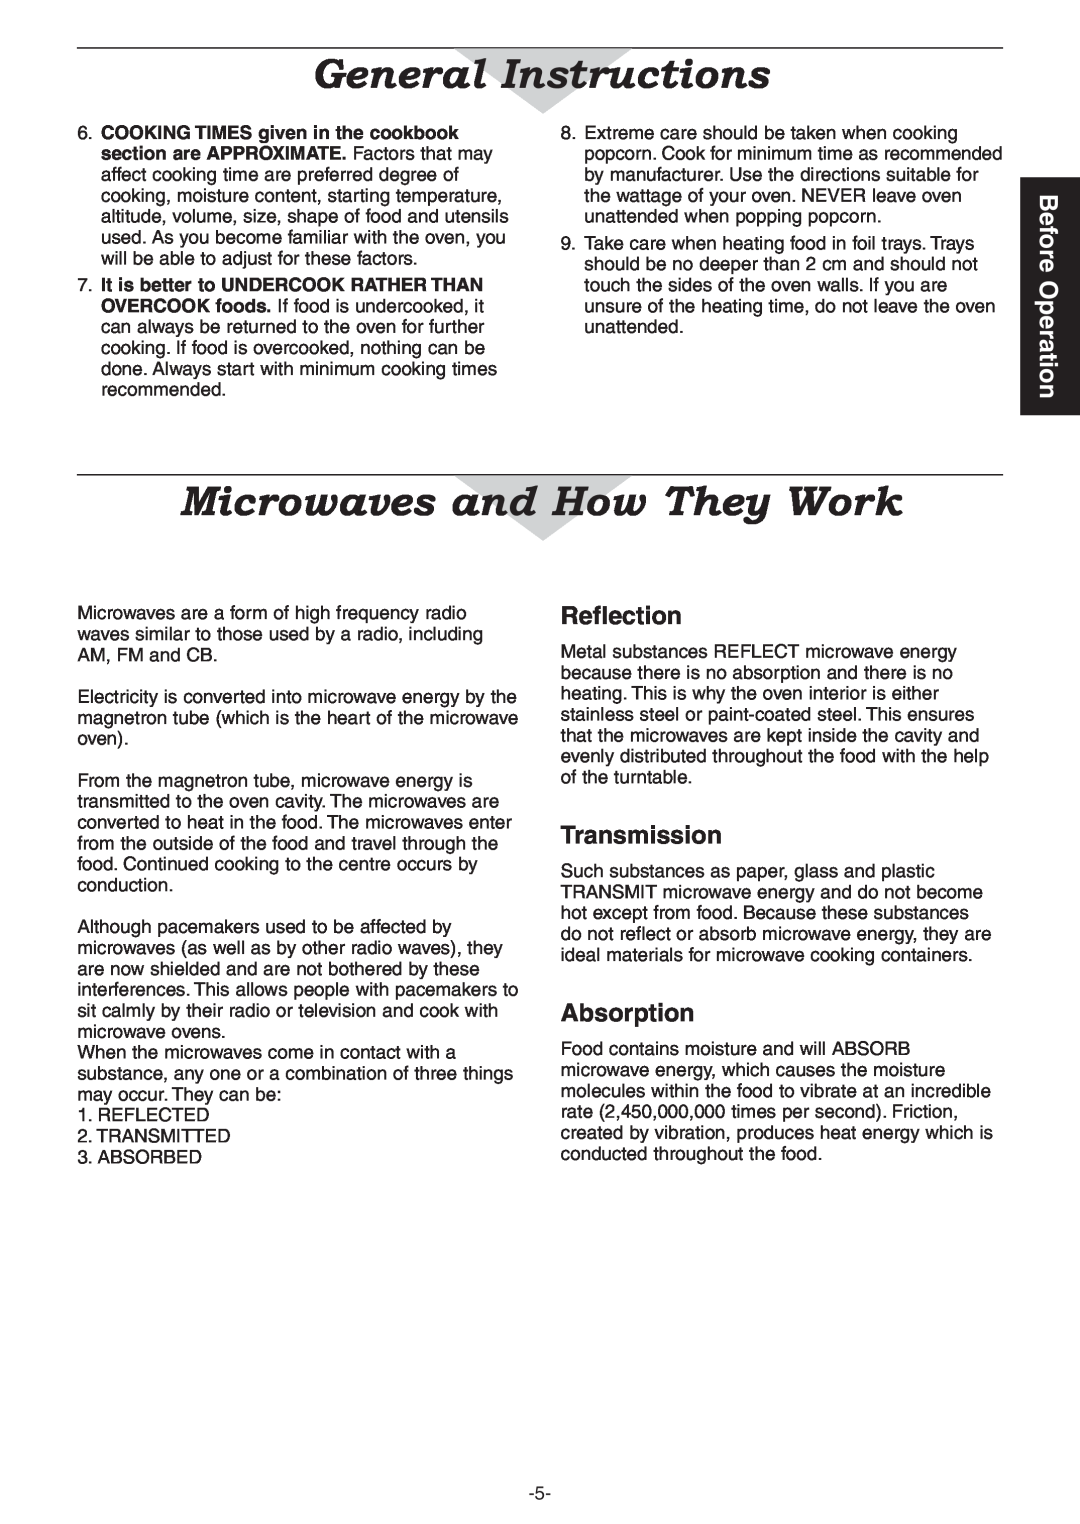 Panasonic NN-CD997S, NN-CD987W Microwaves and How They Work, Reflection, Transmission, Absorption, General Instructions 